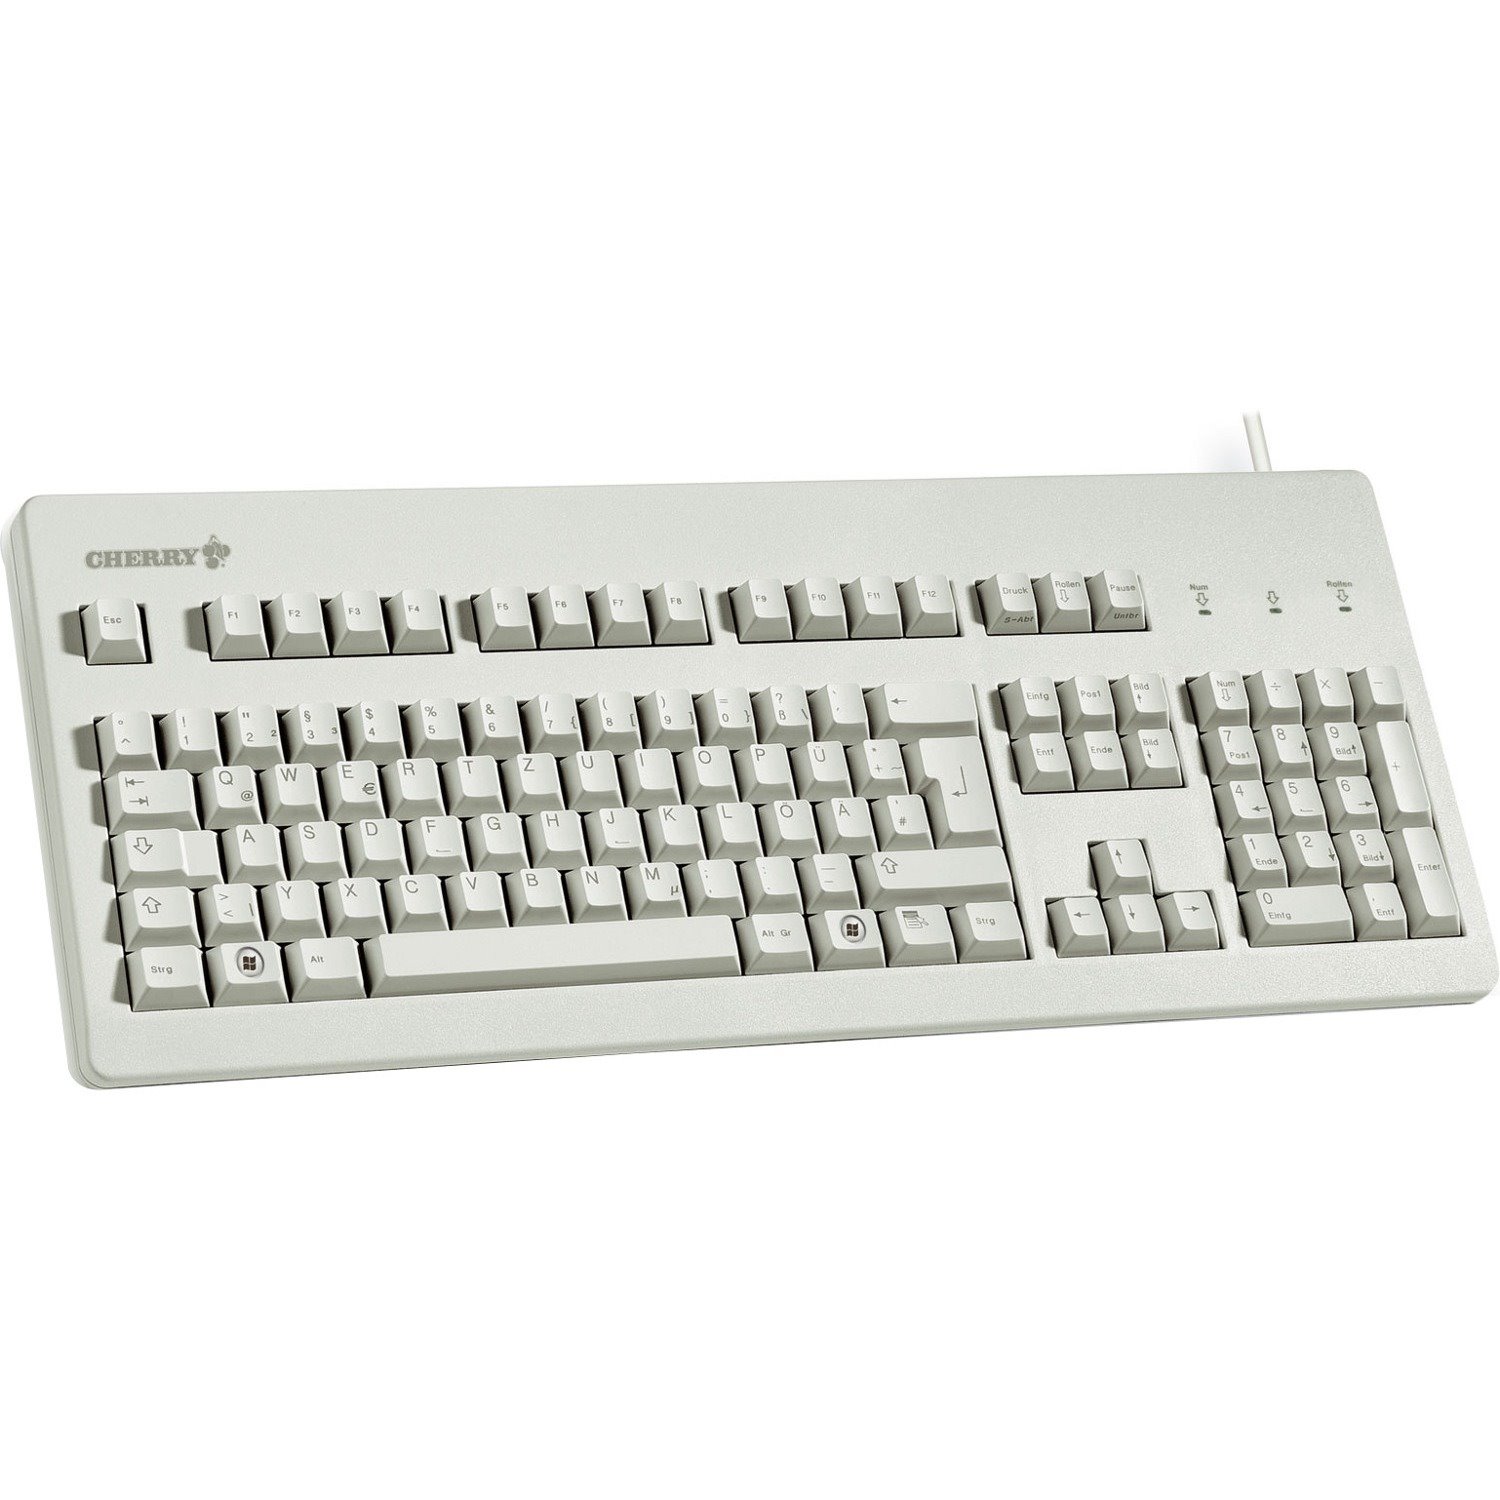 CHERRY G80-3000 Keyboard - Cable Connectivity - USB Interface - English (US) - Light Grey